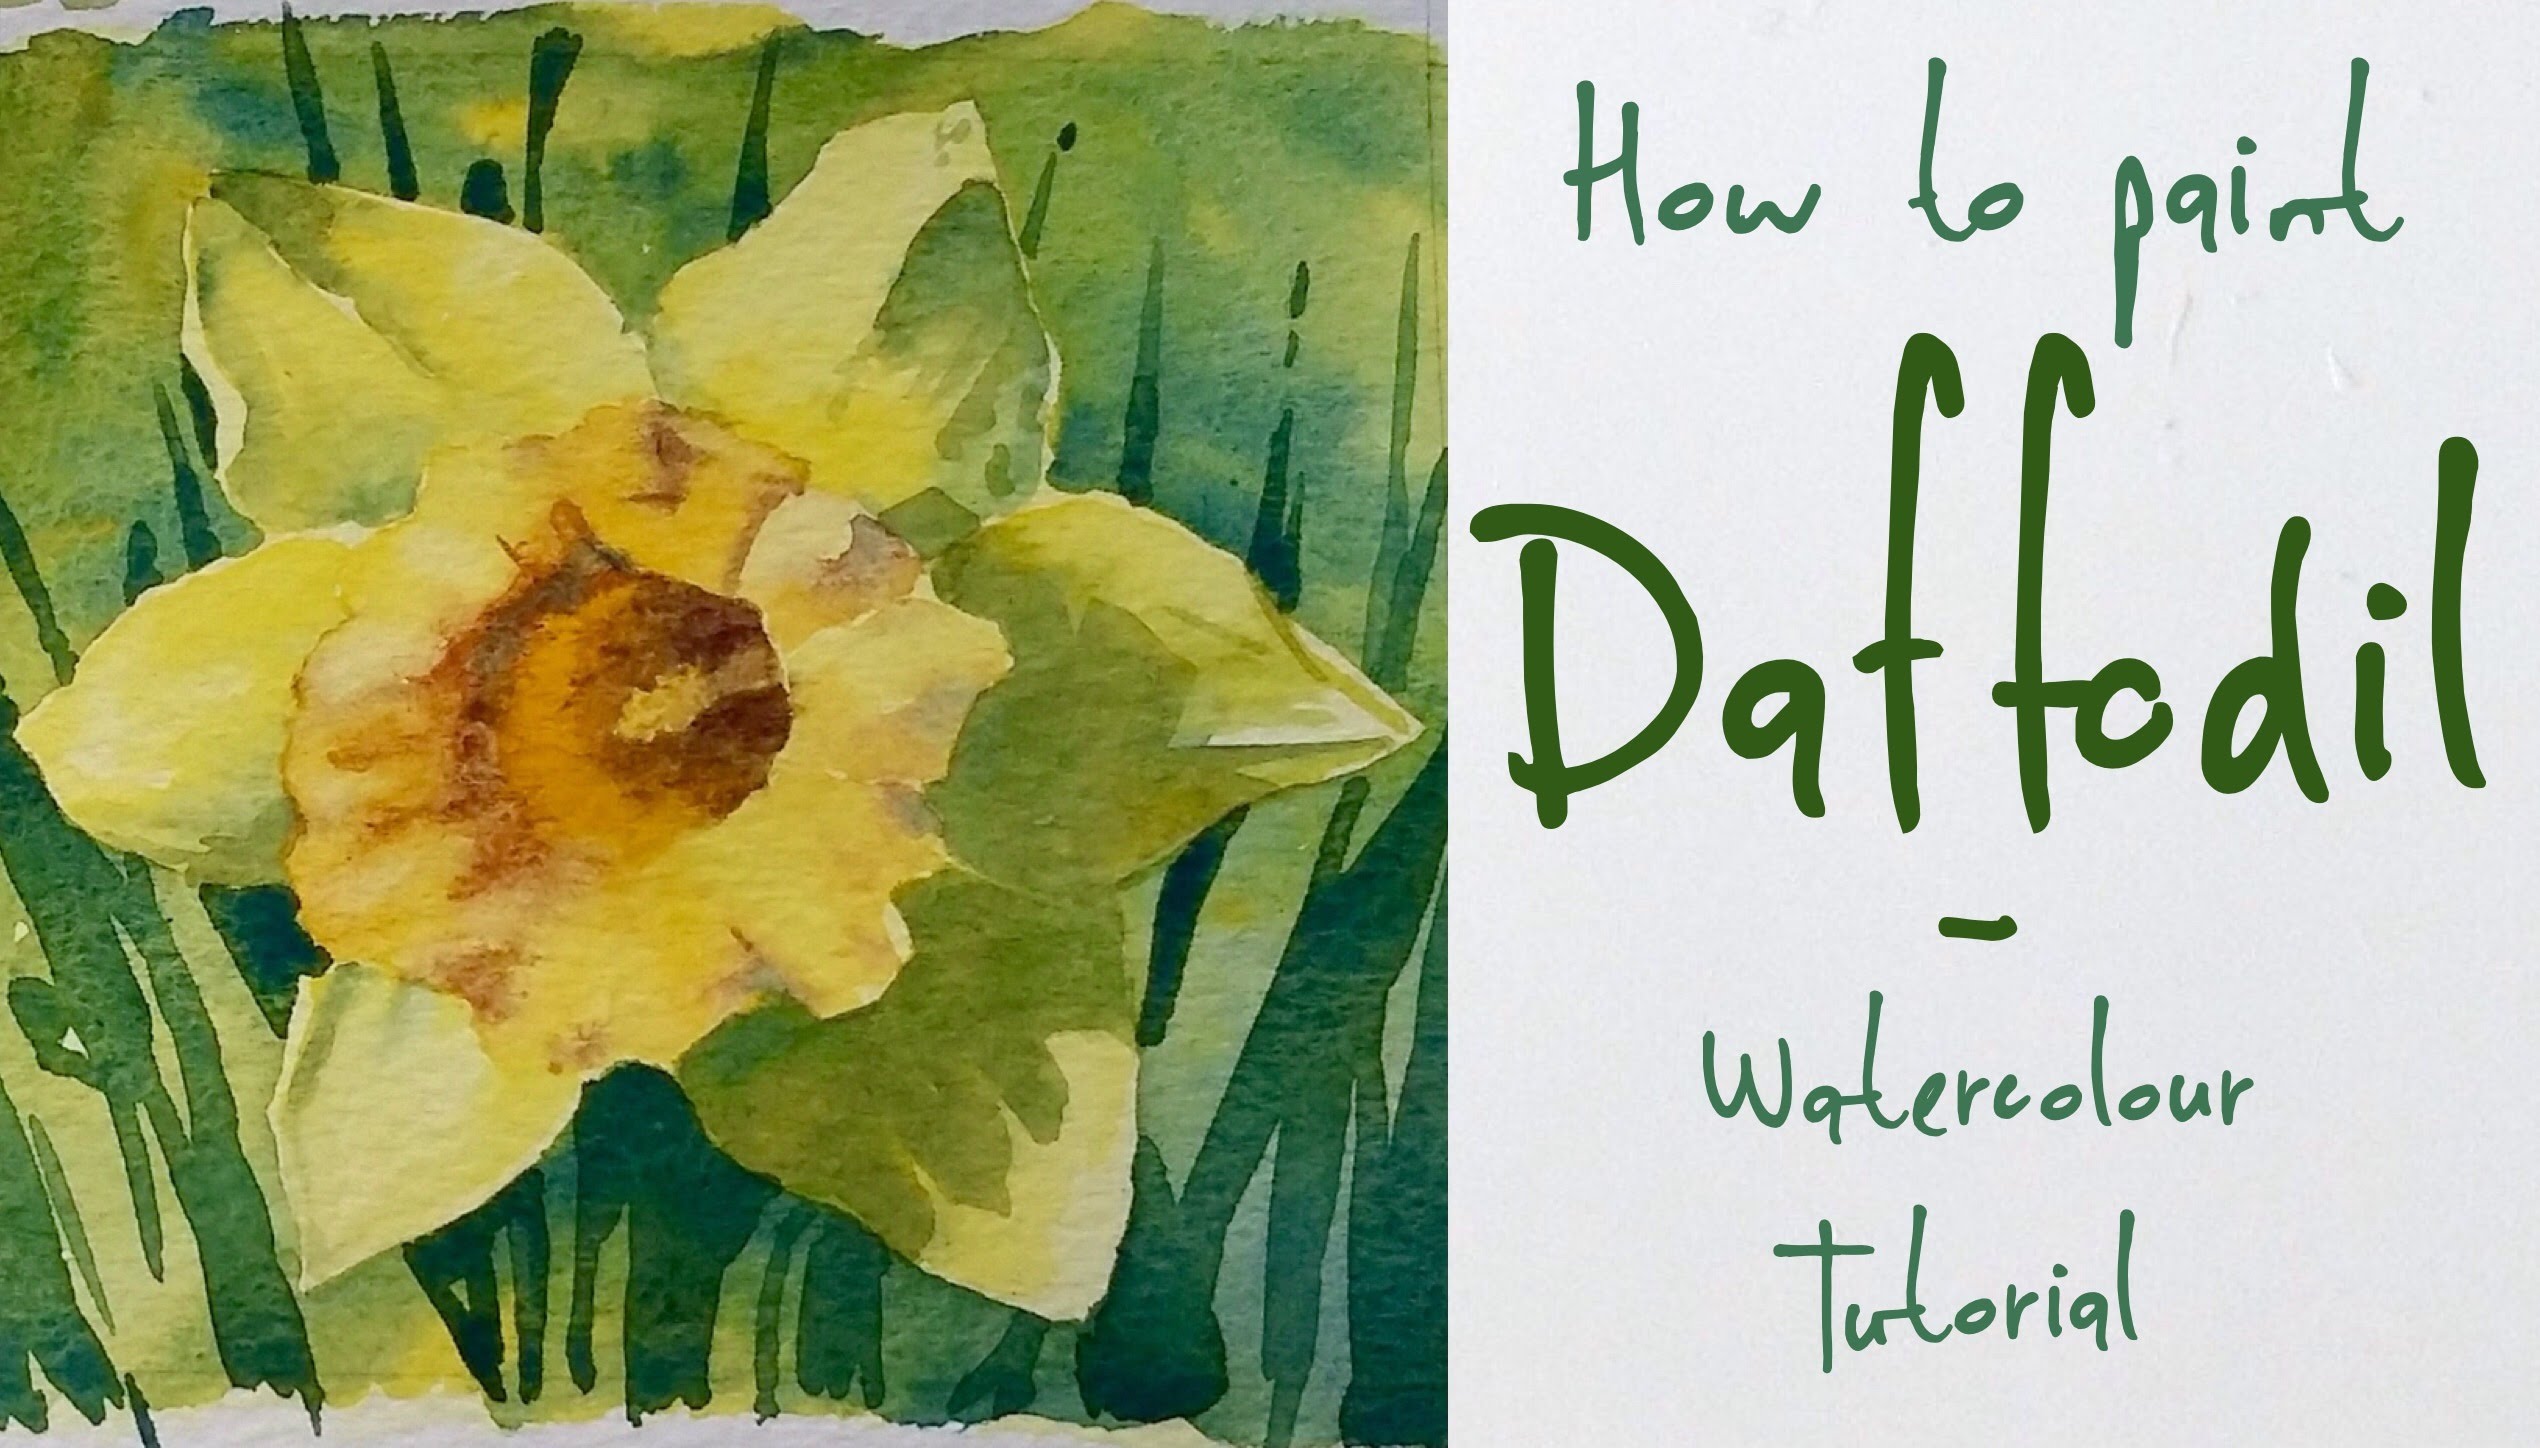 How to paint a Daffodil flower - Watercolour tutorial - YouTube